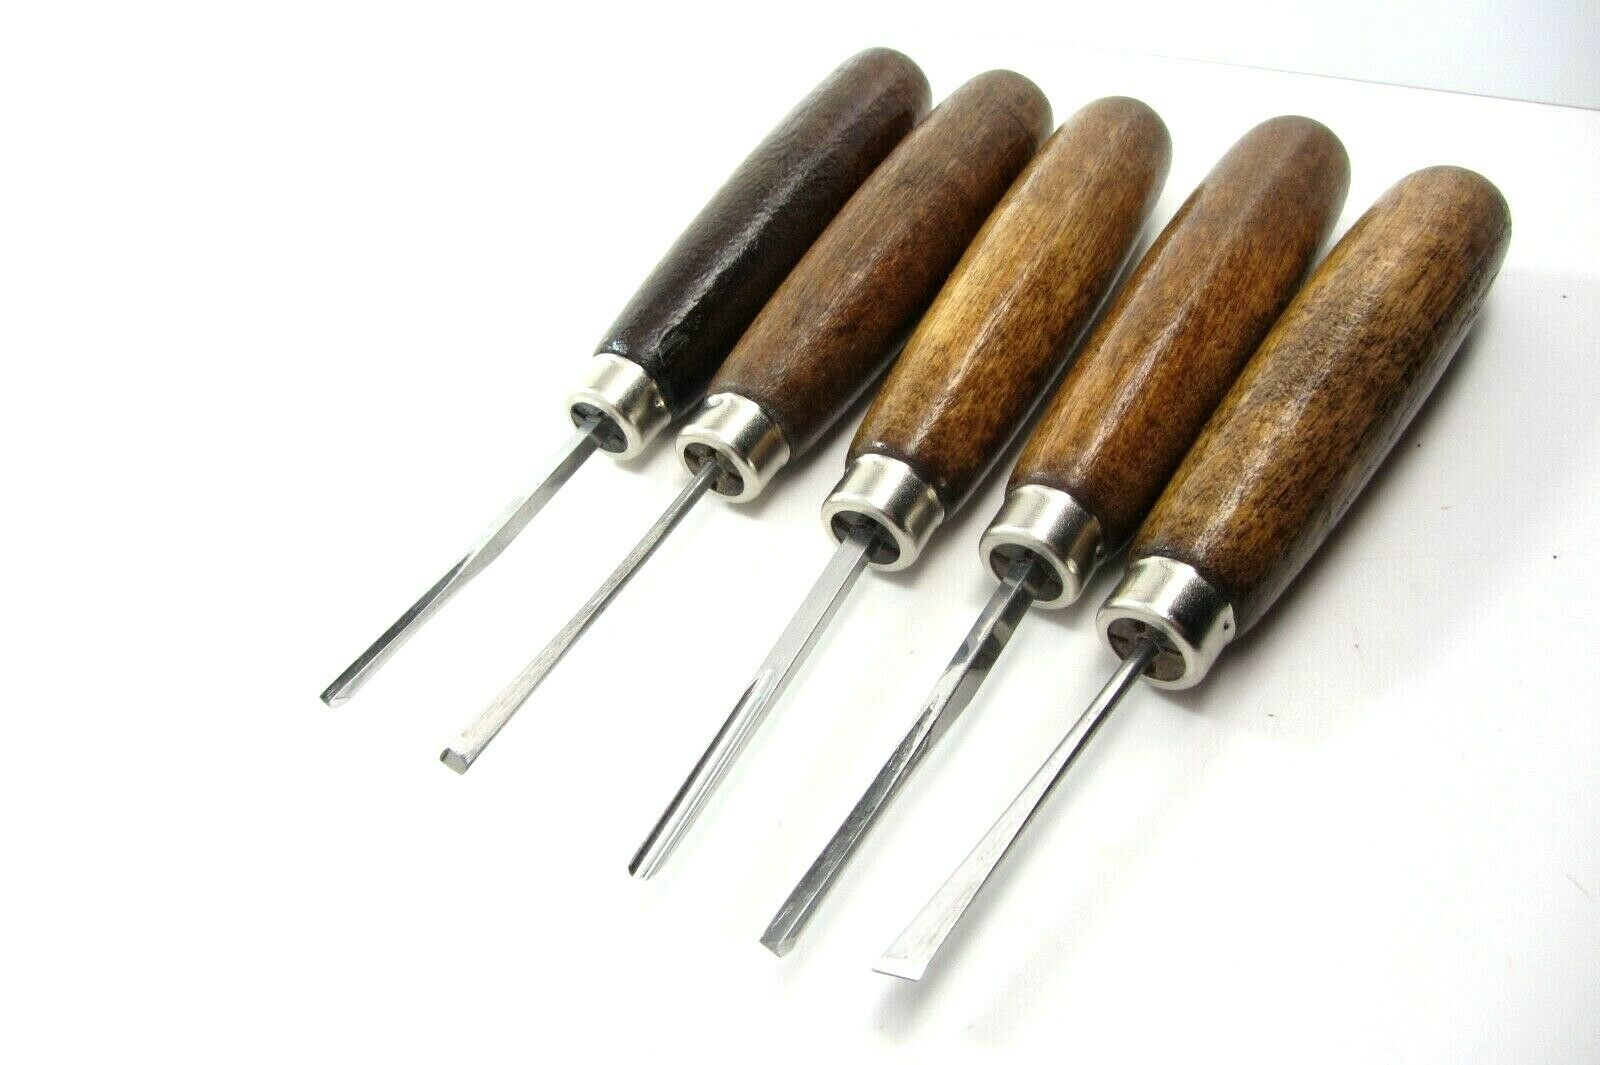 S70 – Extended Wood Carving Set of Knives, Chisels, Gouges, and Sharpening  Accessories in a Tool Holder